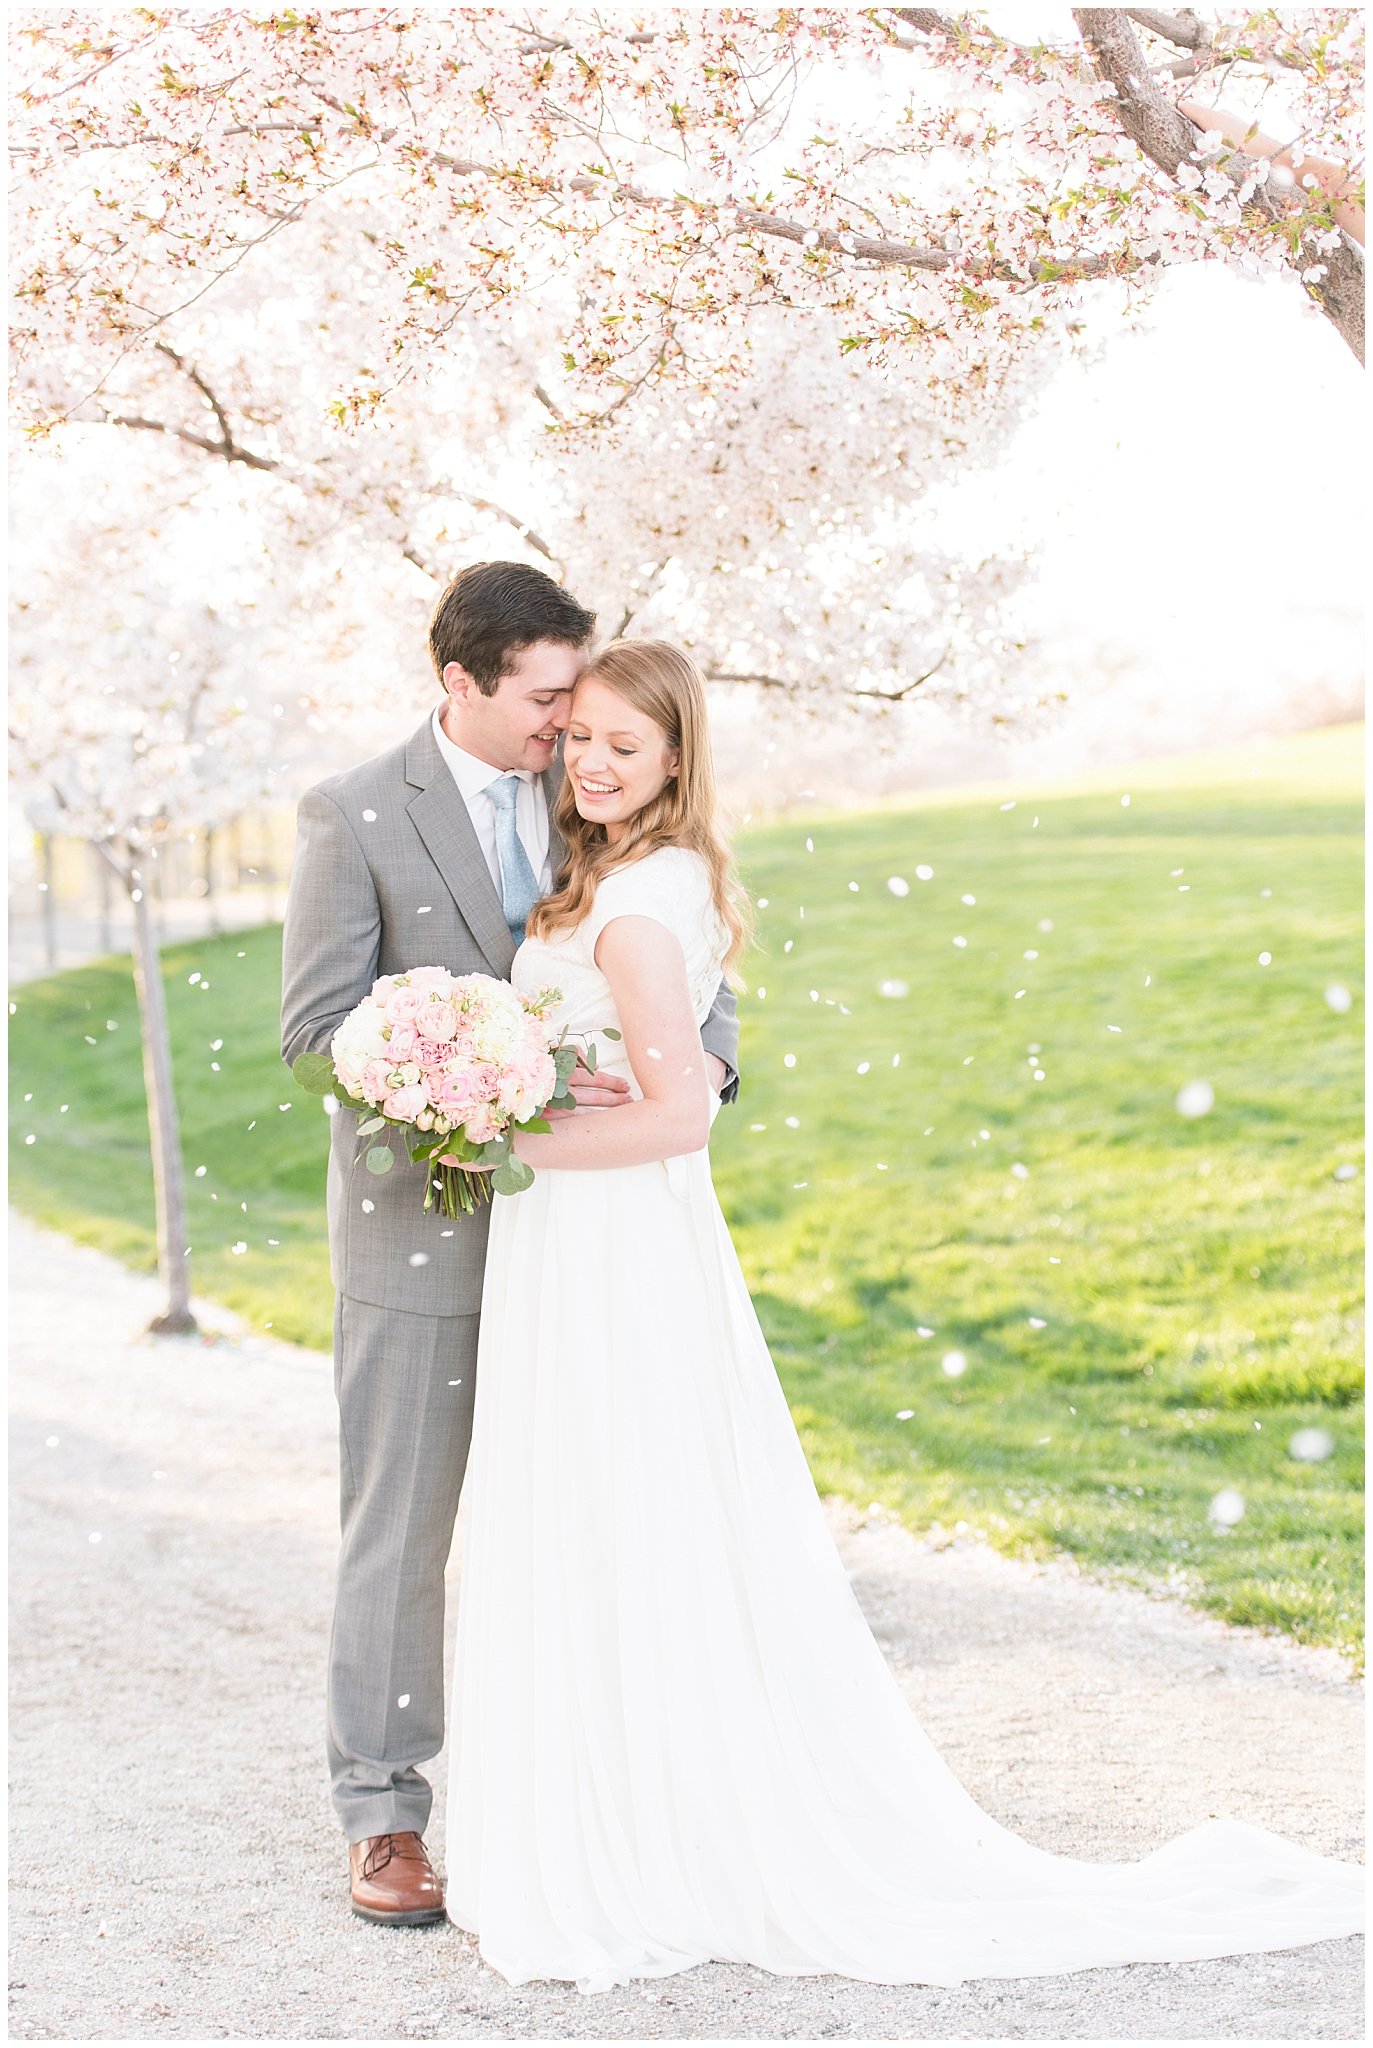 Bride and Groom at the Utah State Capitol blossoms | Top Utah Wedding and Couples Photos 2019 | Jessie and Dallin Photography